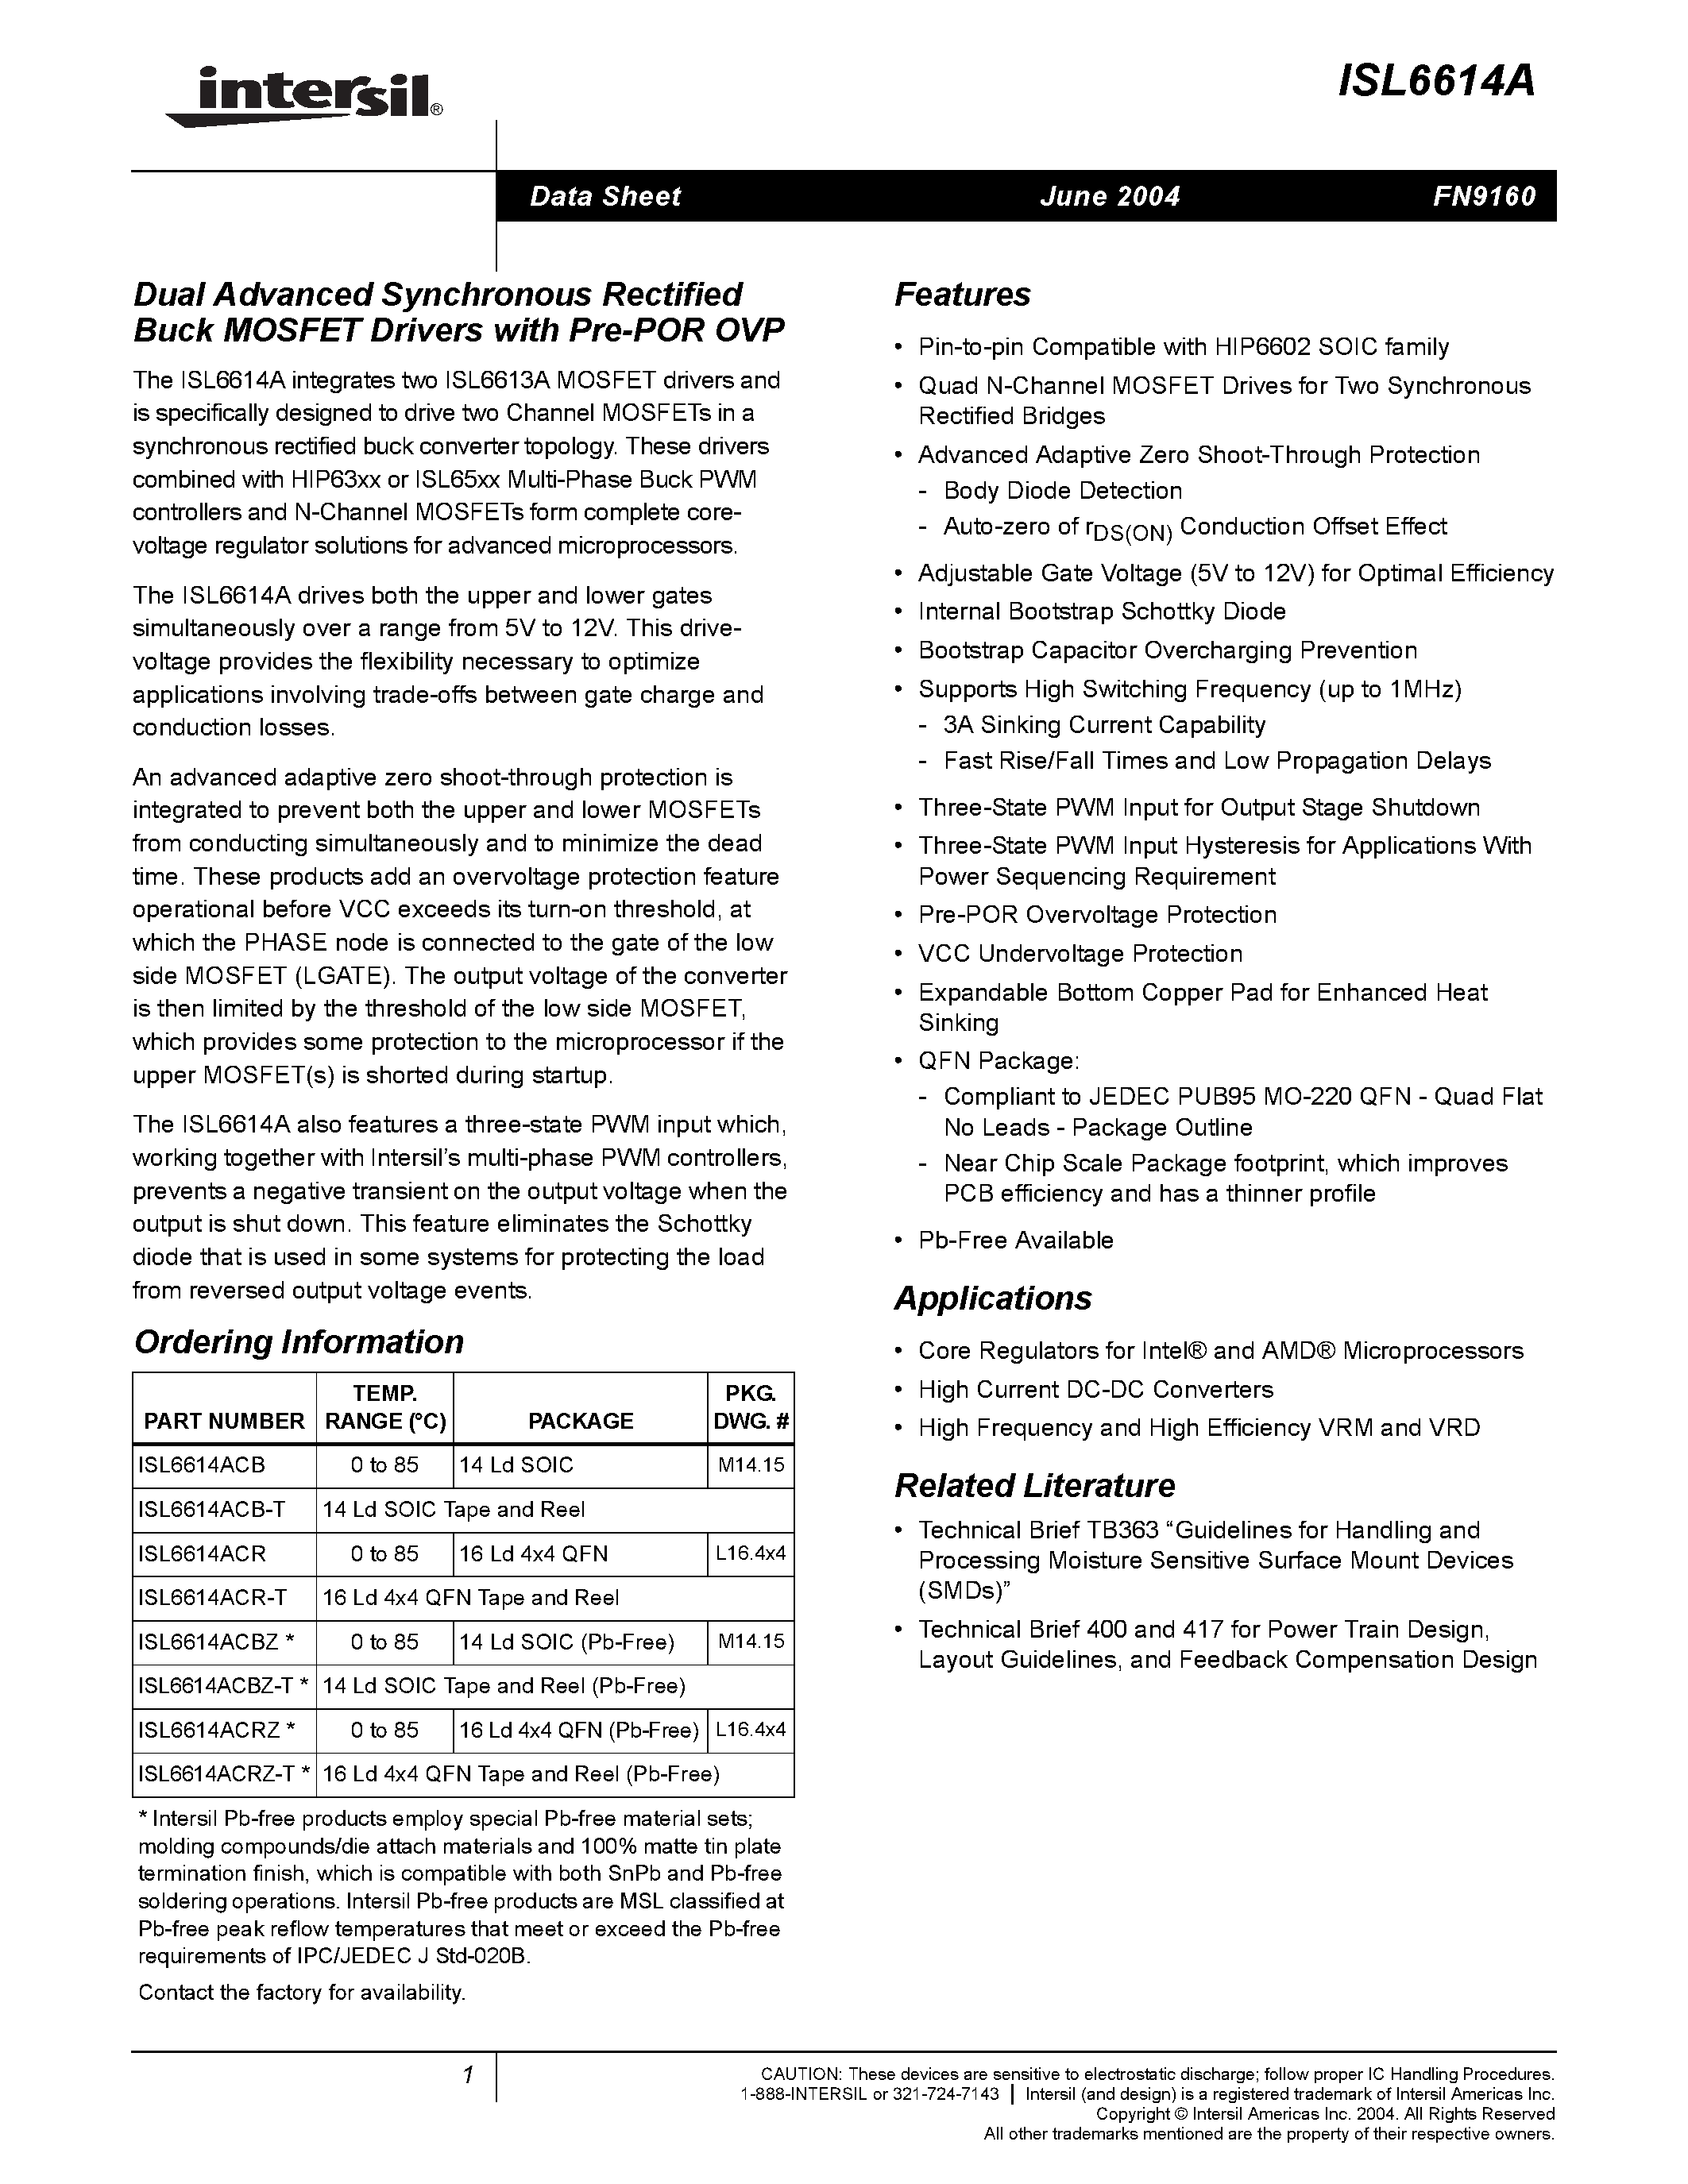 Datasheet ISL6614ACR-T - Dual Advanced Synchronous Rectified Buck MOSFET Drivers with Pre-POR OVP page 1